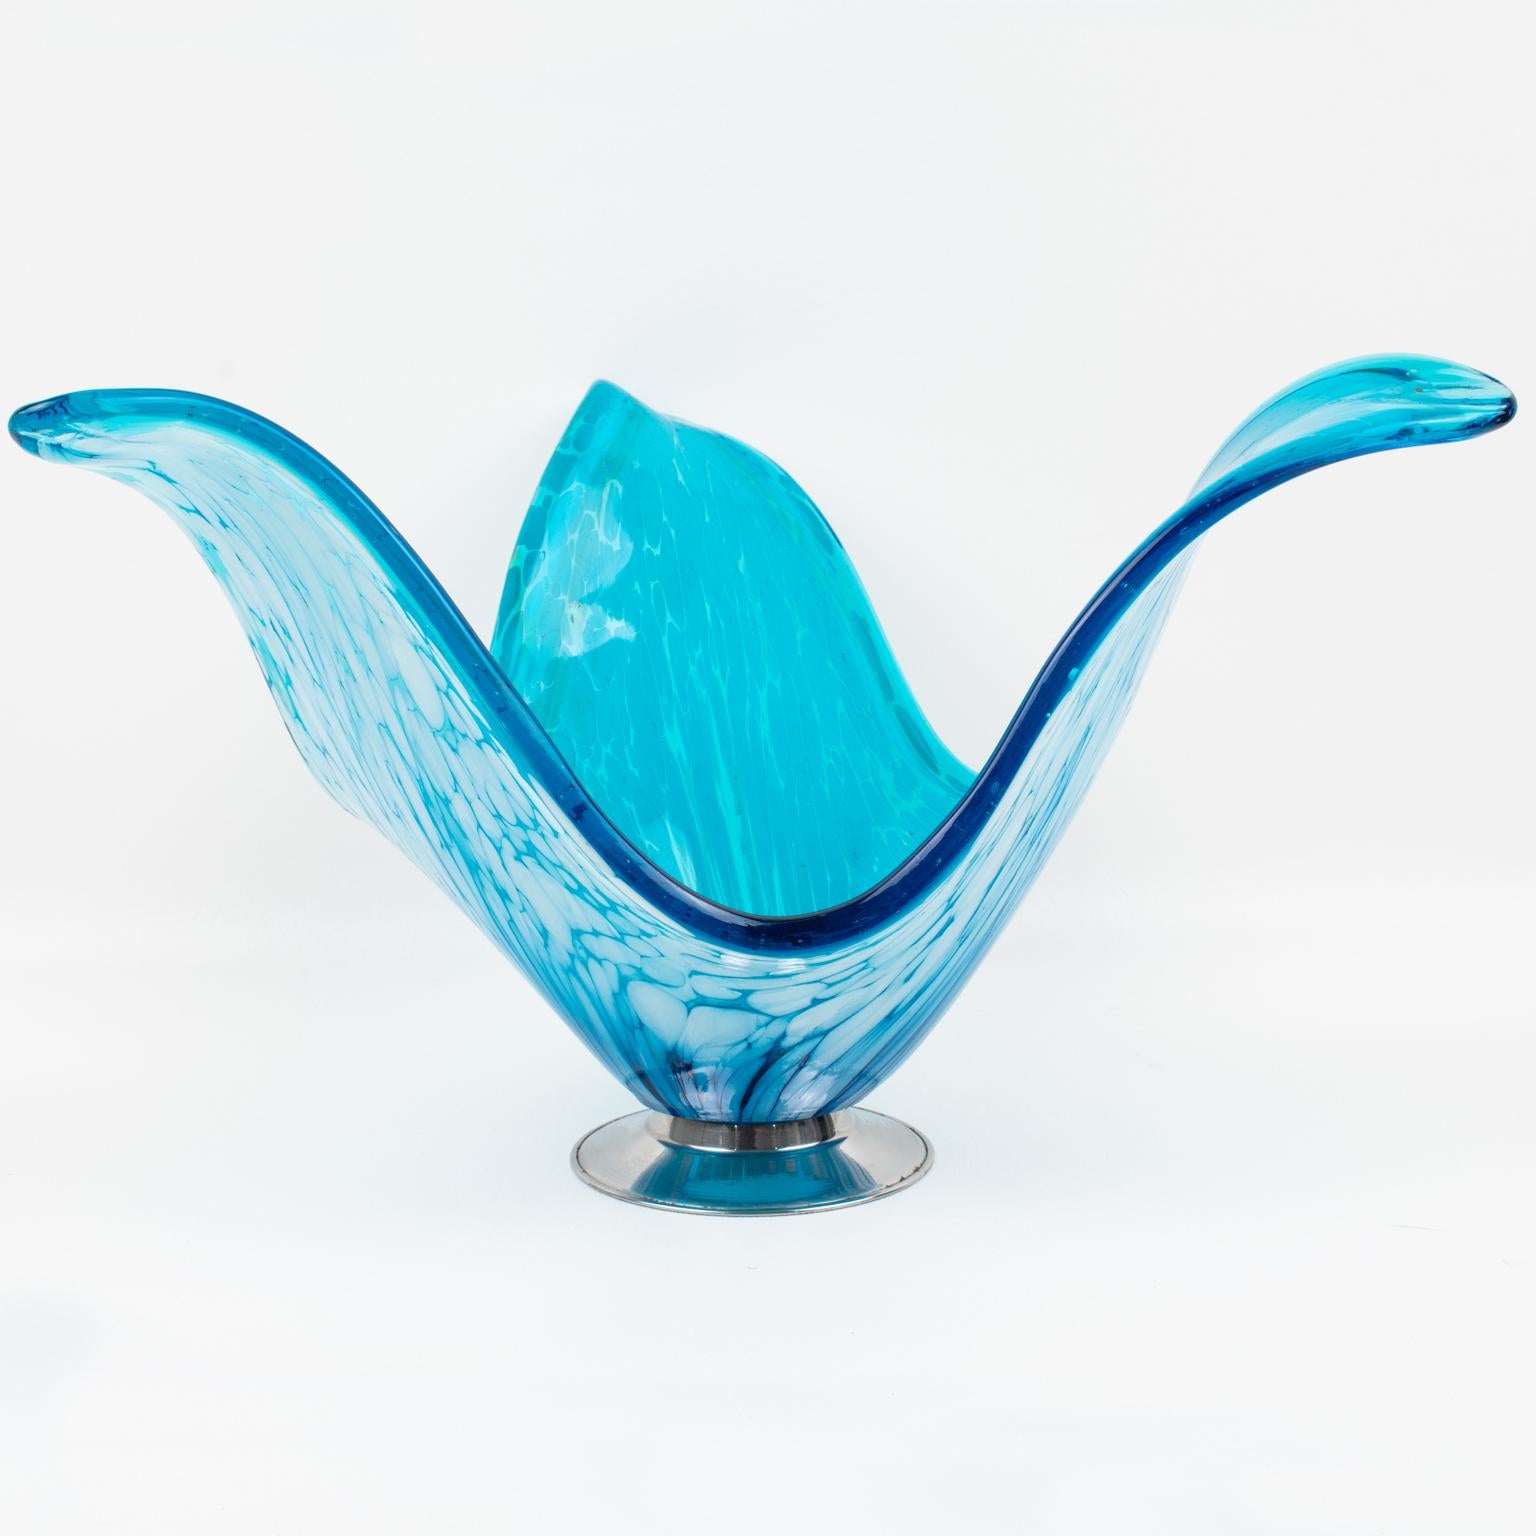 This beautiful hand-blown Art glass vase or decorative bowl centerpiece was designed in Murano, Italy, in the 1960s. The large organic and sculptural shape has a stylized jellyfish or Medusa pattern with turquoise blue color and white bubbling